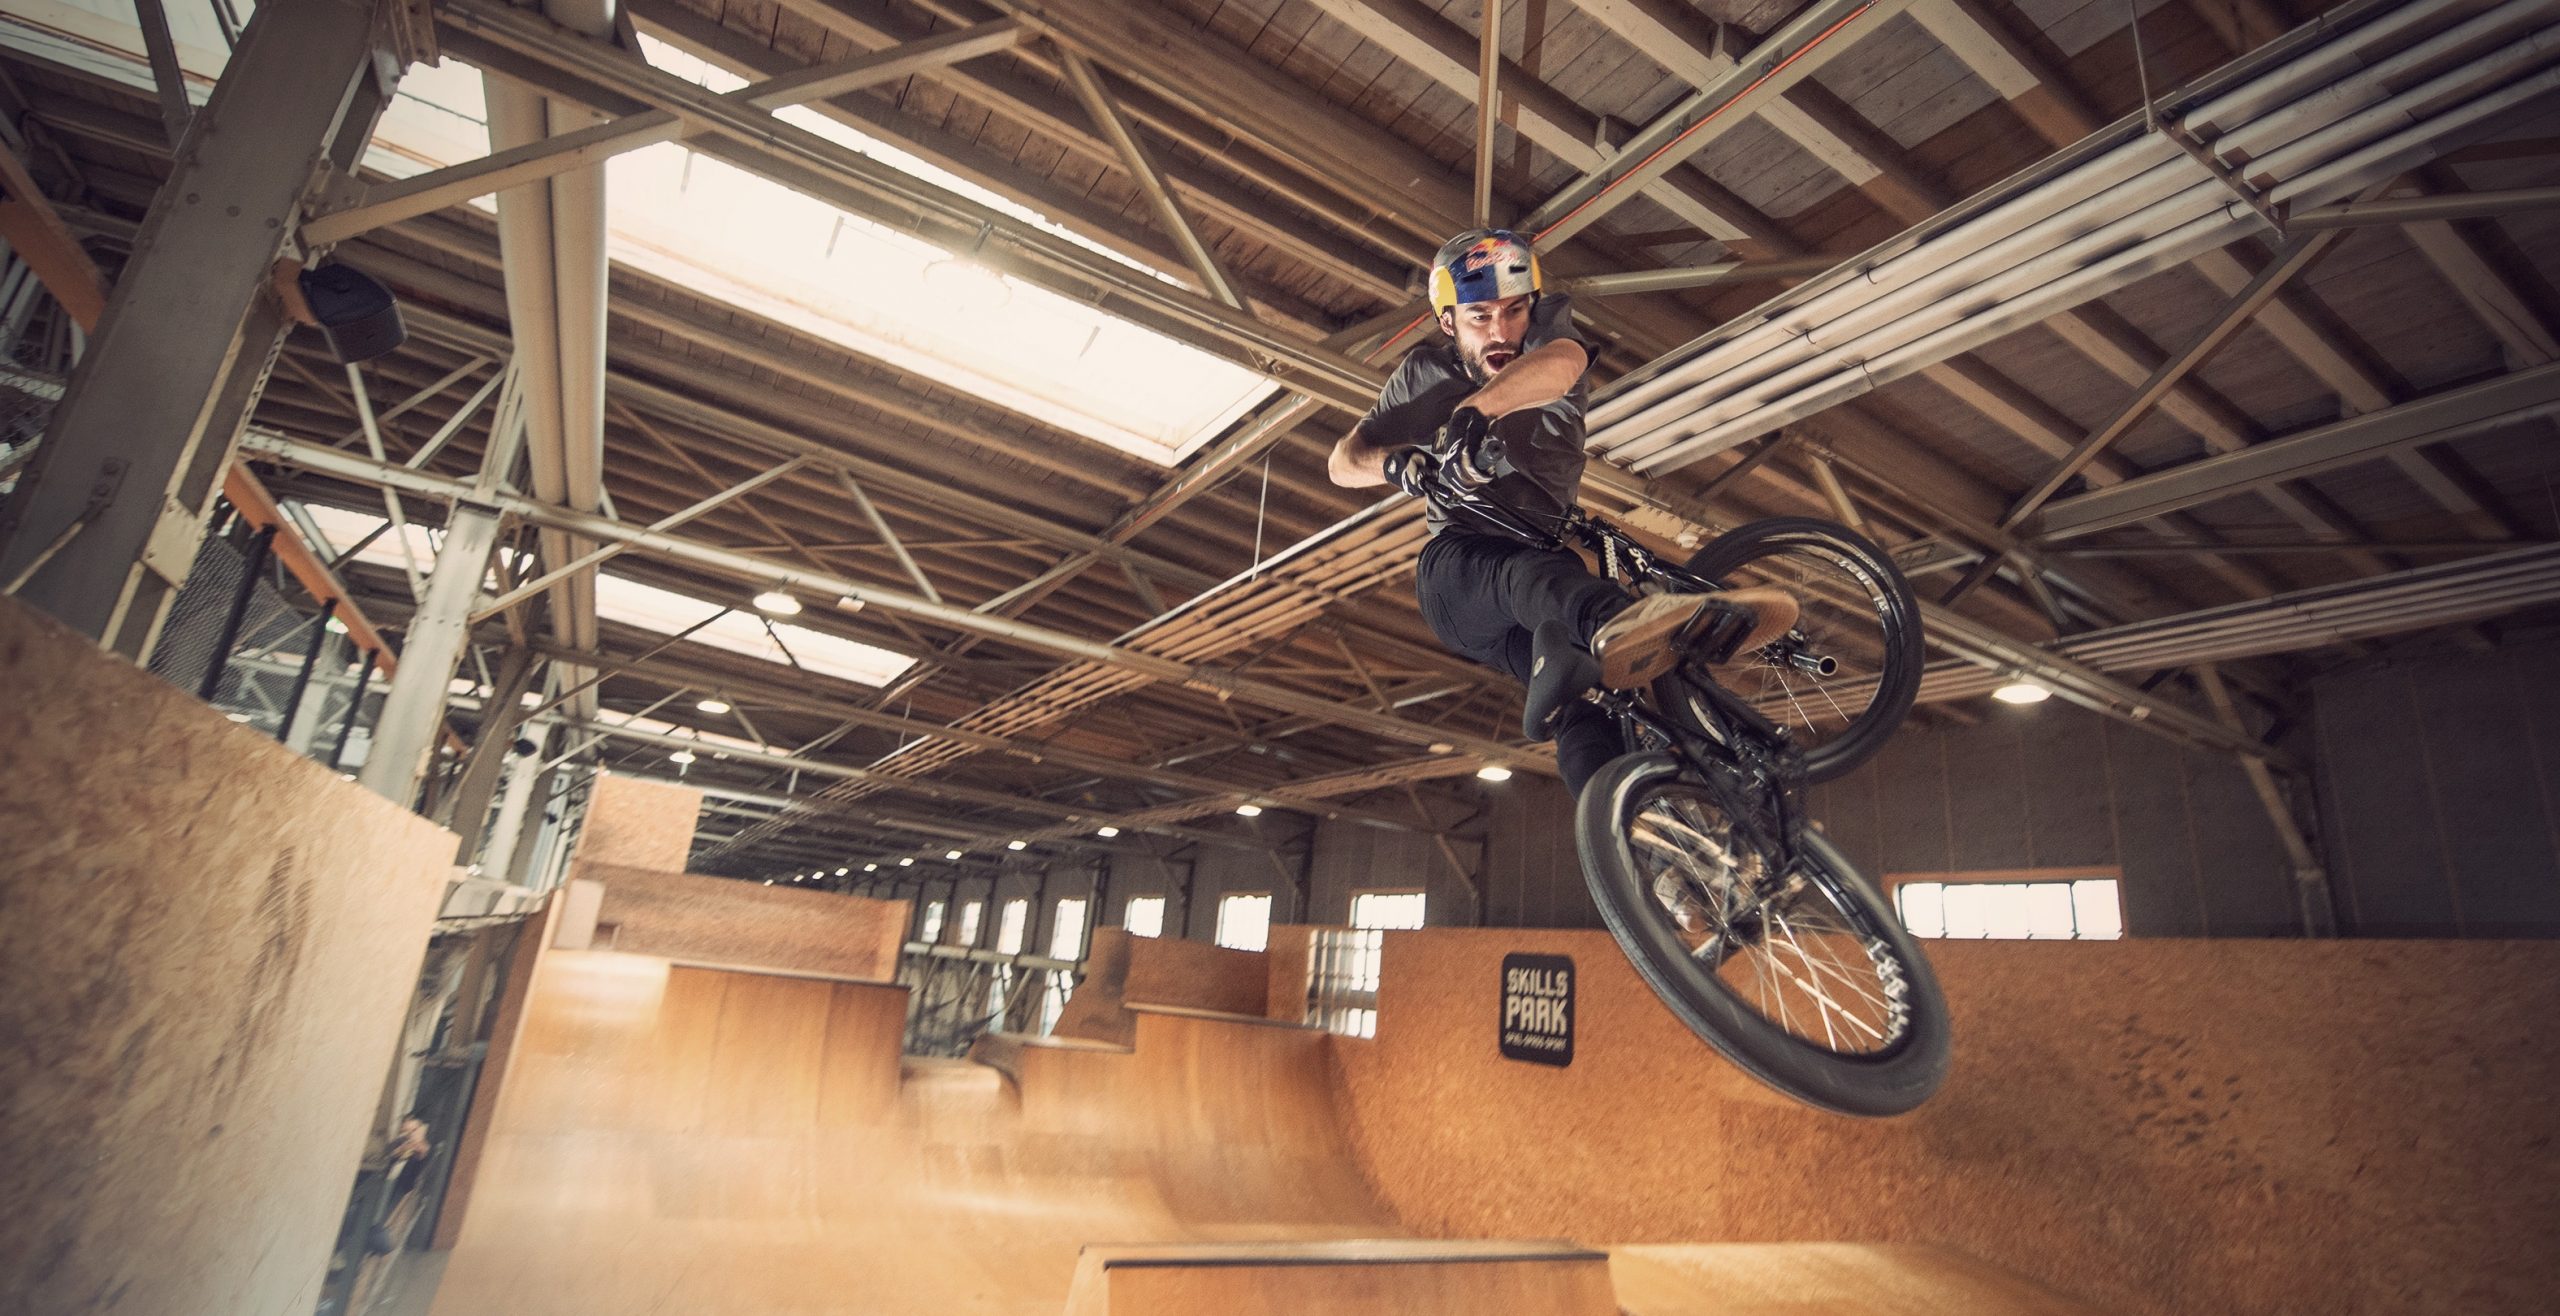 Daniel Wedemeijer clicking a turndown on the step up at Skills park